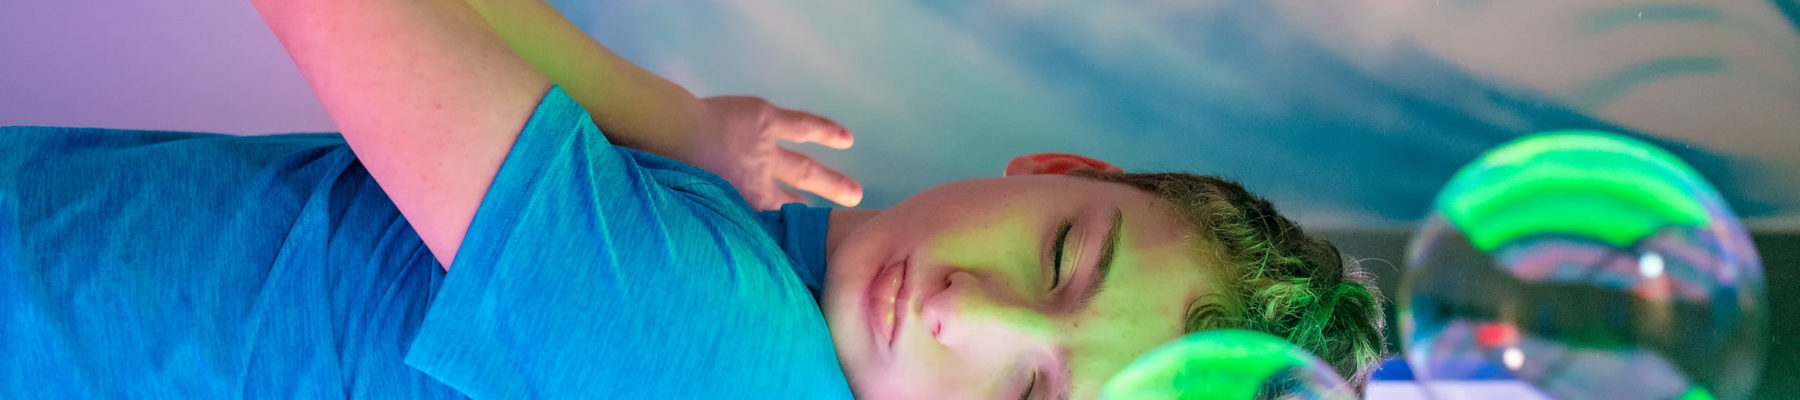 Boy relaxing in multi-sensory room with bubbles.